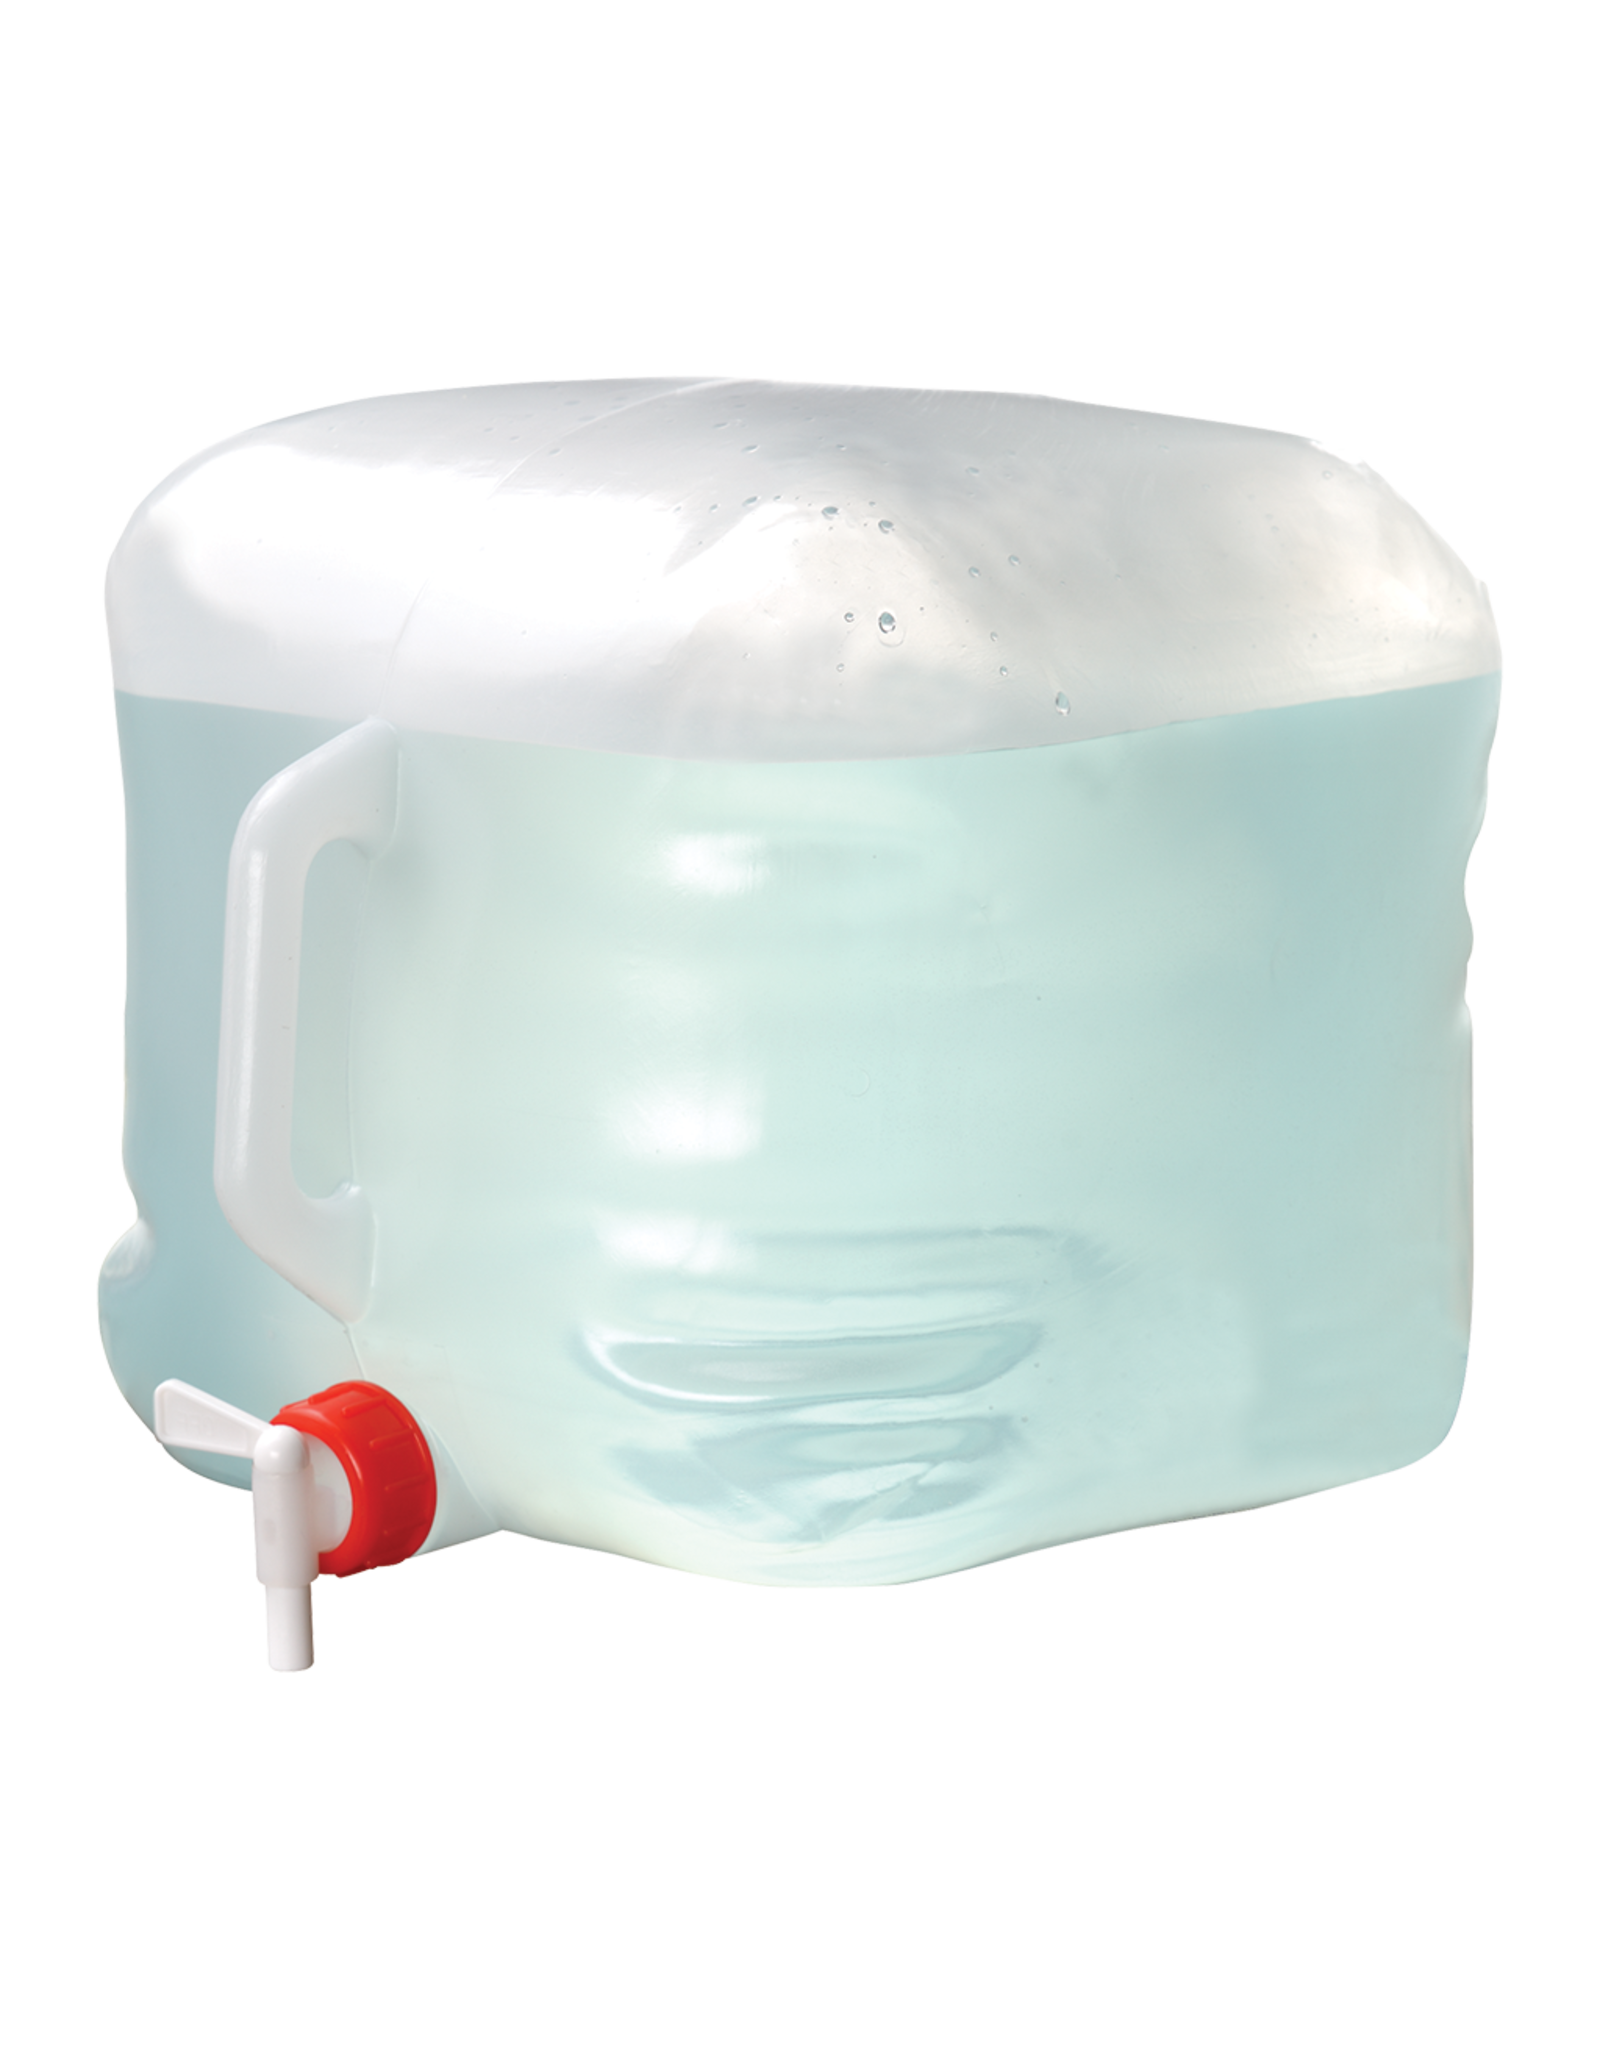 Coghlan's Collapsible Water Container 5 gal.